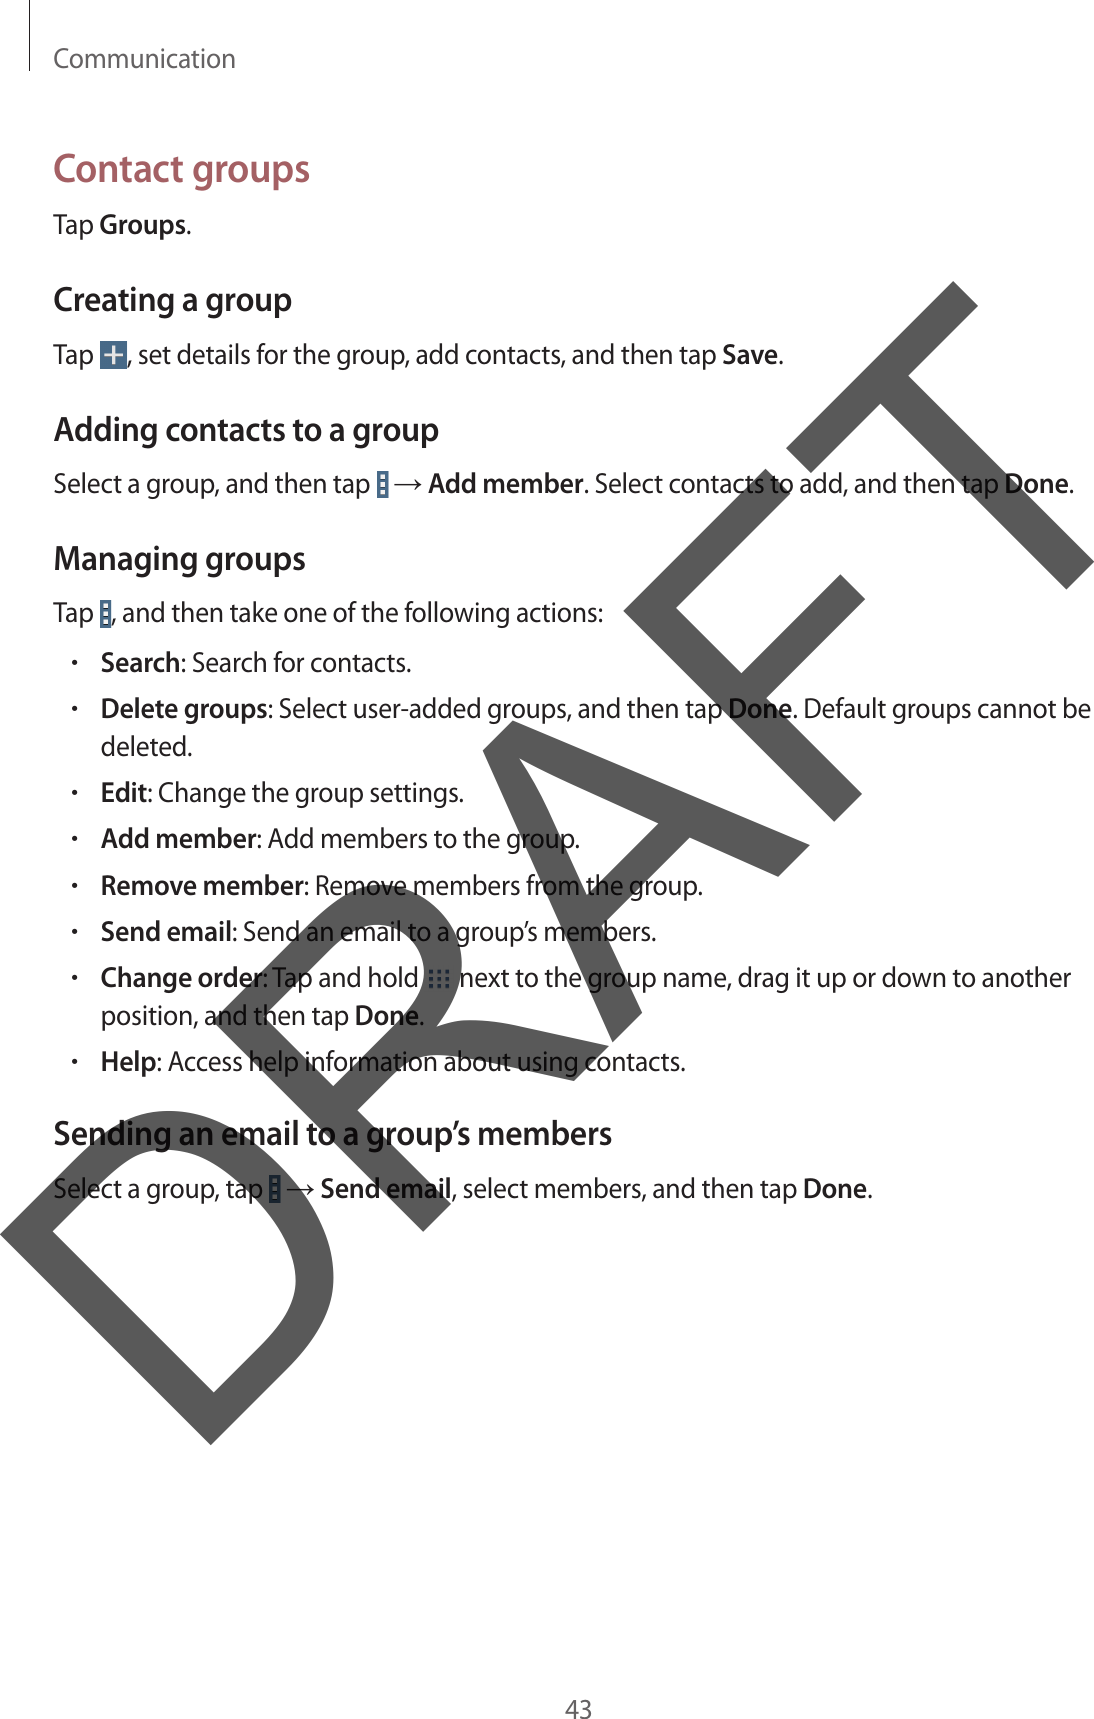 Communication43Contact groupsTap Groups.Creating a groupTap  , set details for the group, add contacts, and then tap Save.Adding contacts to a groupSelect a group, and then tap   → Add member. Select contacts to add, and then tap Done.Managing groupsTap  , and then take one of the following actions:•Search: Search for contacts.•Delete groups: Select user-added groups, and then tap Done. Default groups cannot bedeleted.•Edit: Change the group settings.•Add member: Add members to the group.•Remove member: Remove members from the group.•Send email: Send an email to a group’s members.•Change order: Tap and hold   next to the group name, drag it up or down to anotherposition, and then tap Done.•Help: Access help information about using contacts.Sending an email to a group’s membersSelect a group, tap   → Send email, select members, and then tap Done.DRAFT